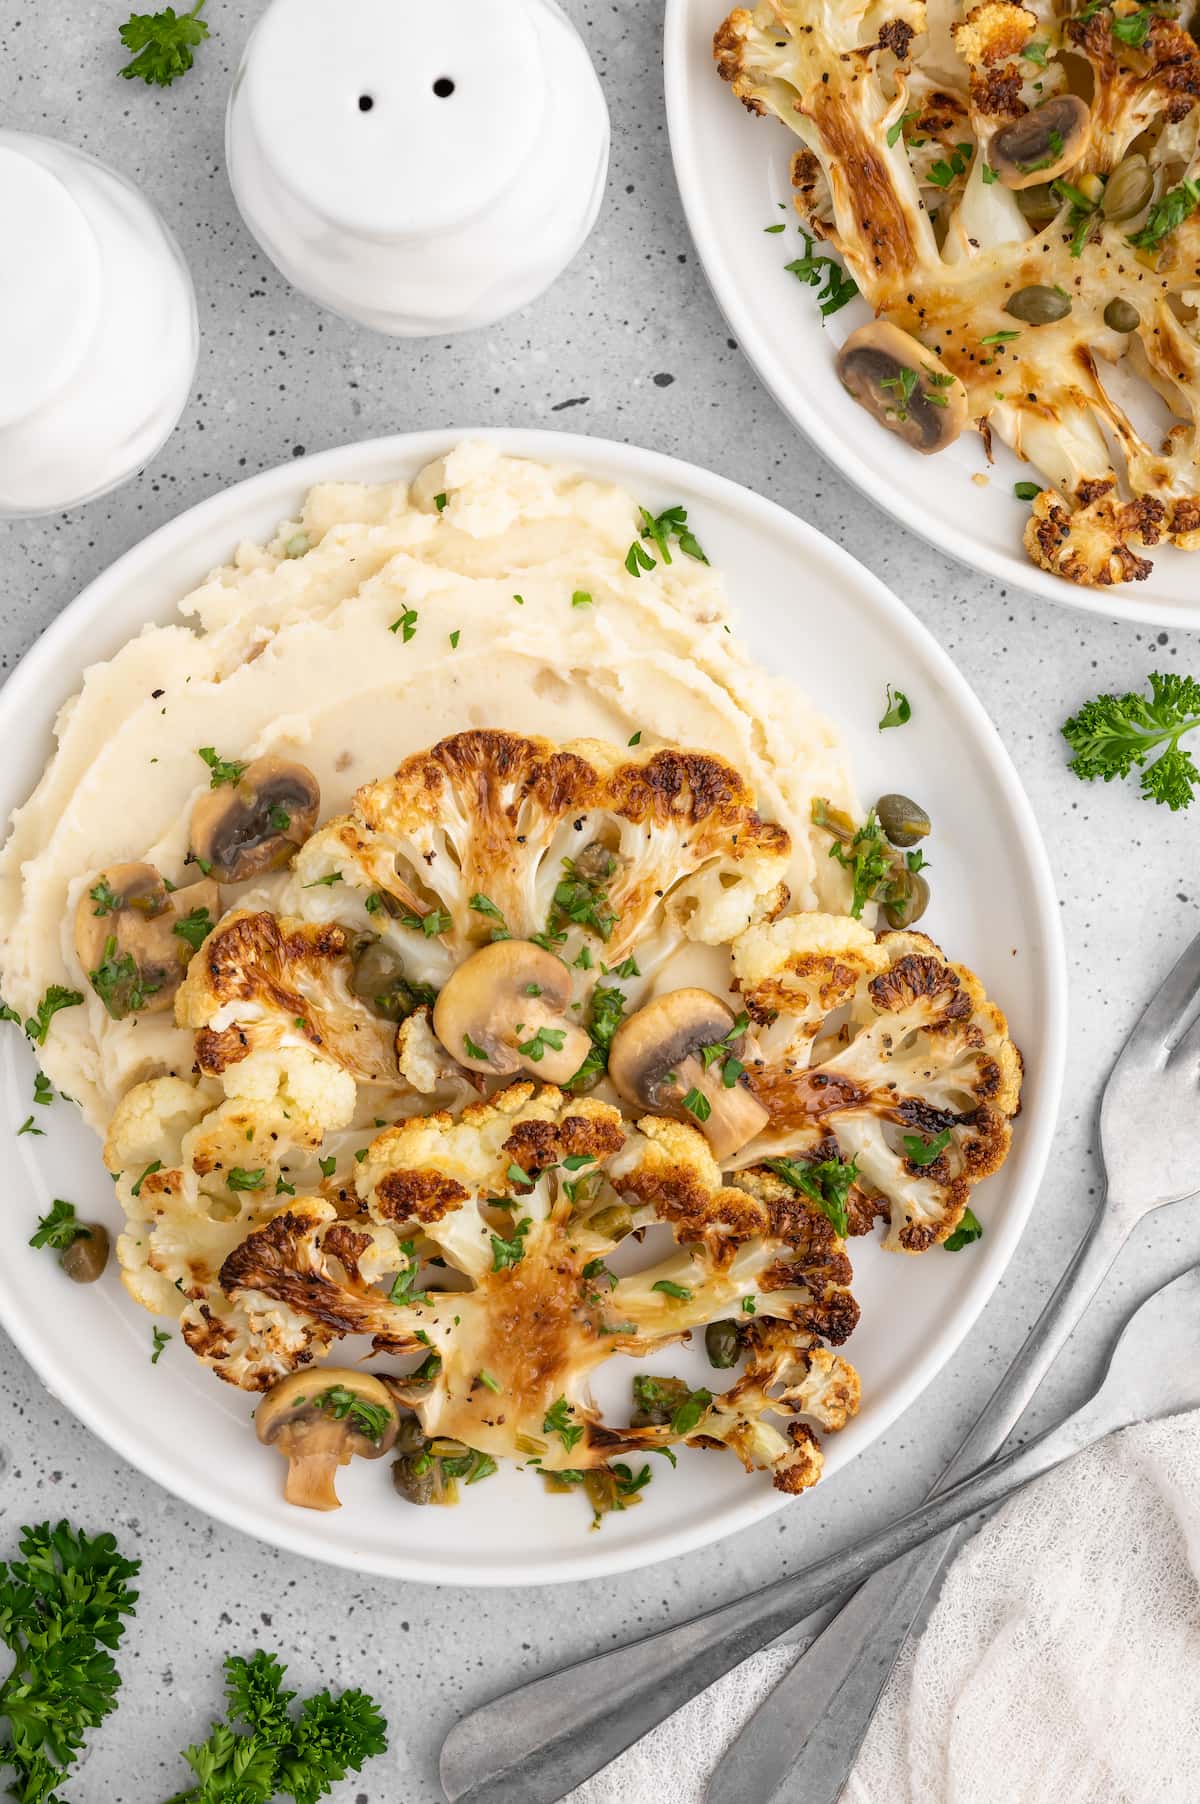 Vegan cauliflower steaks on a bed of mashed potatoes.